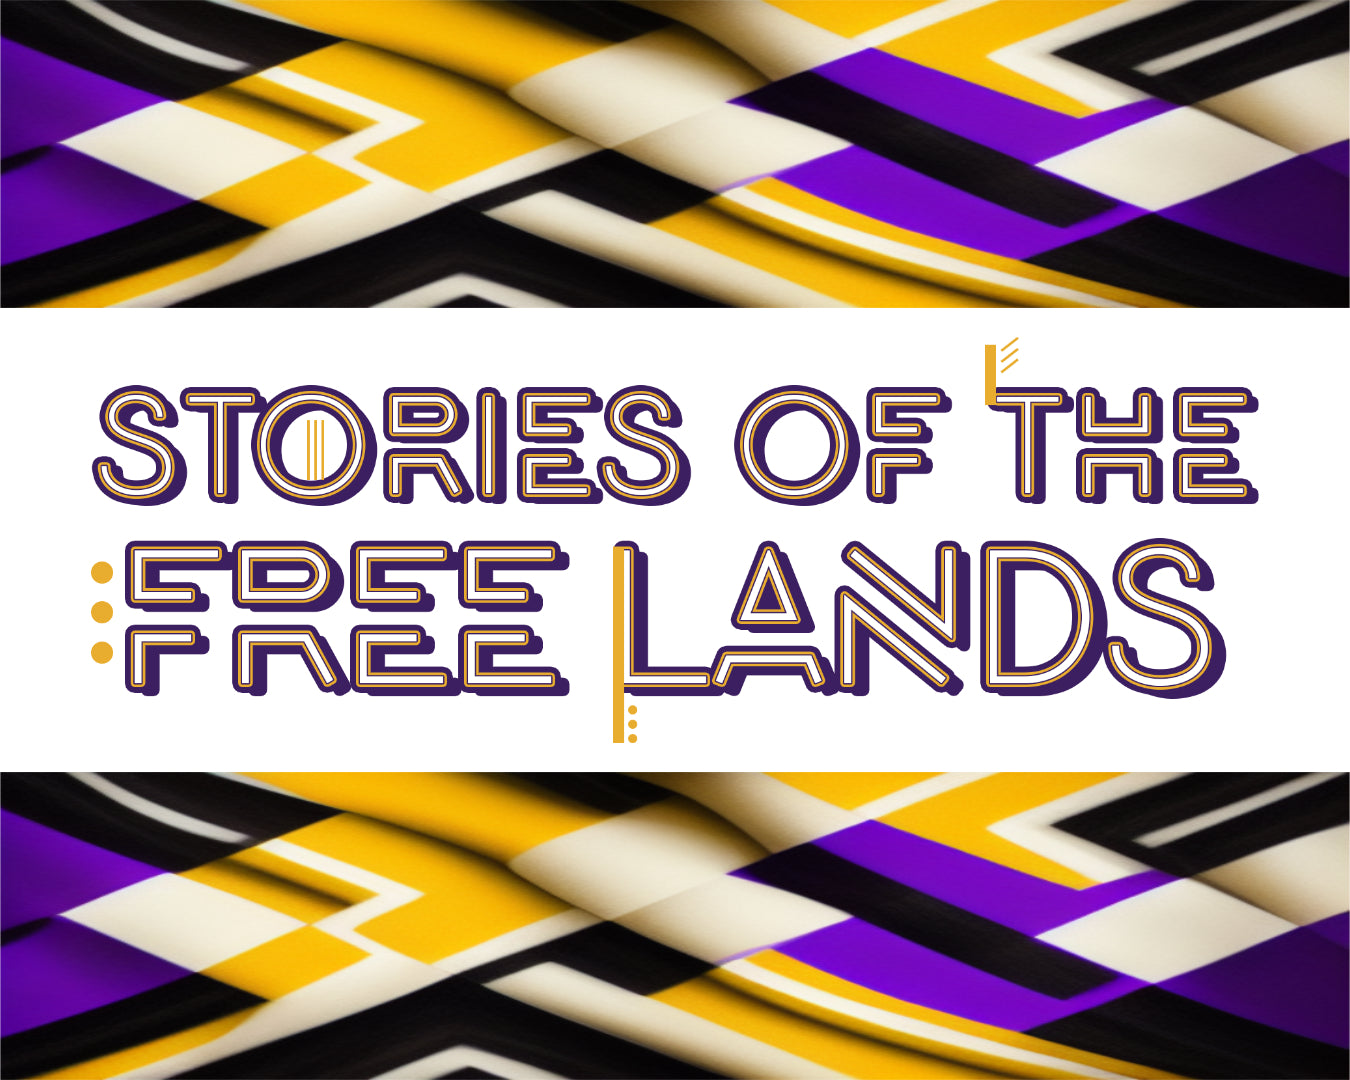 Stories of the Free Lands